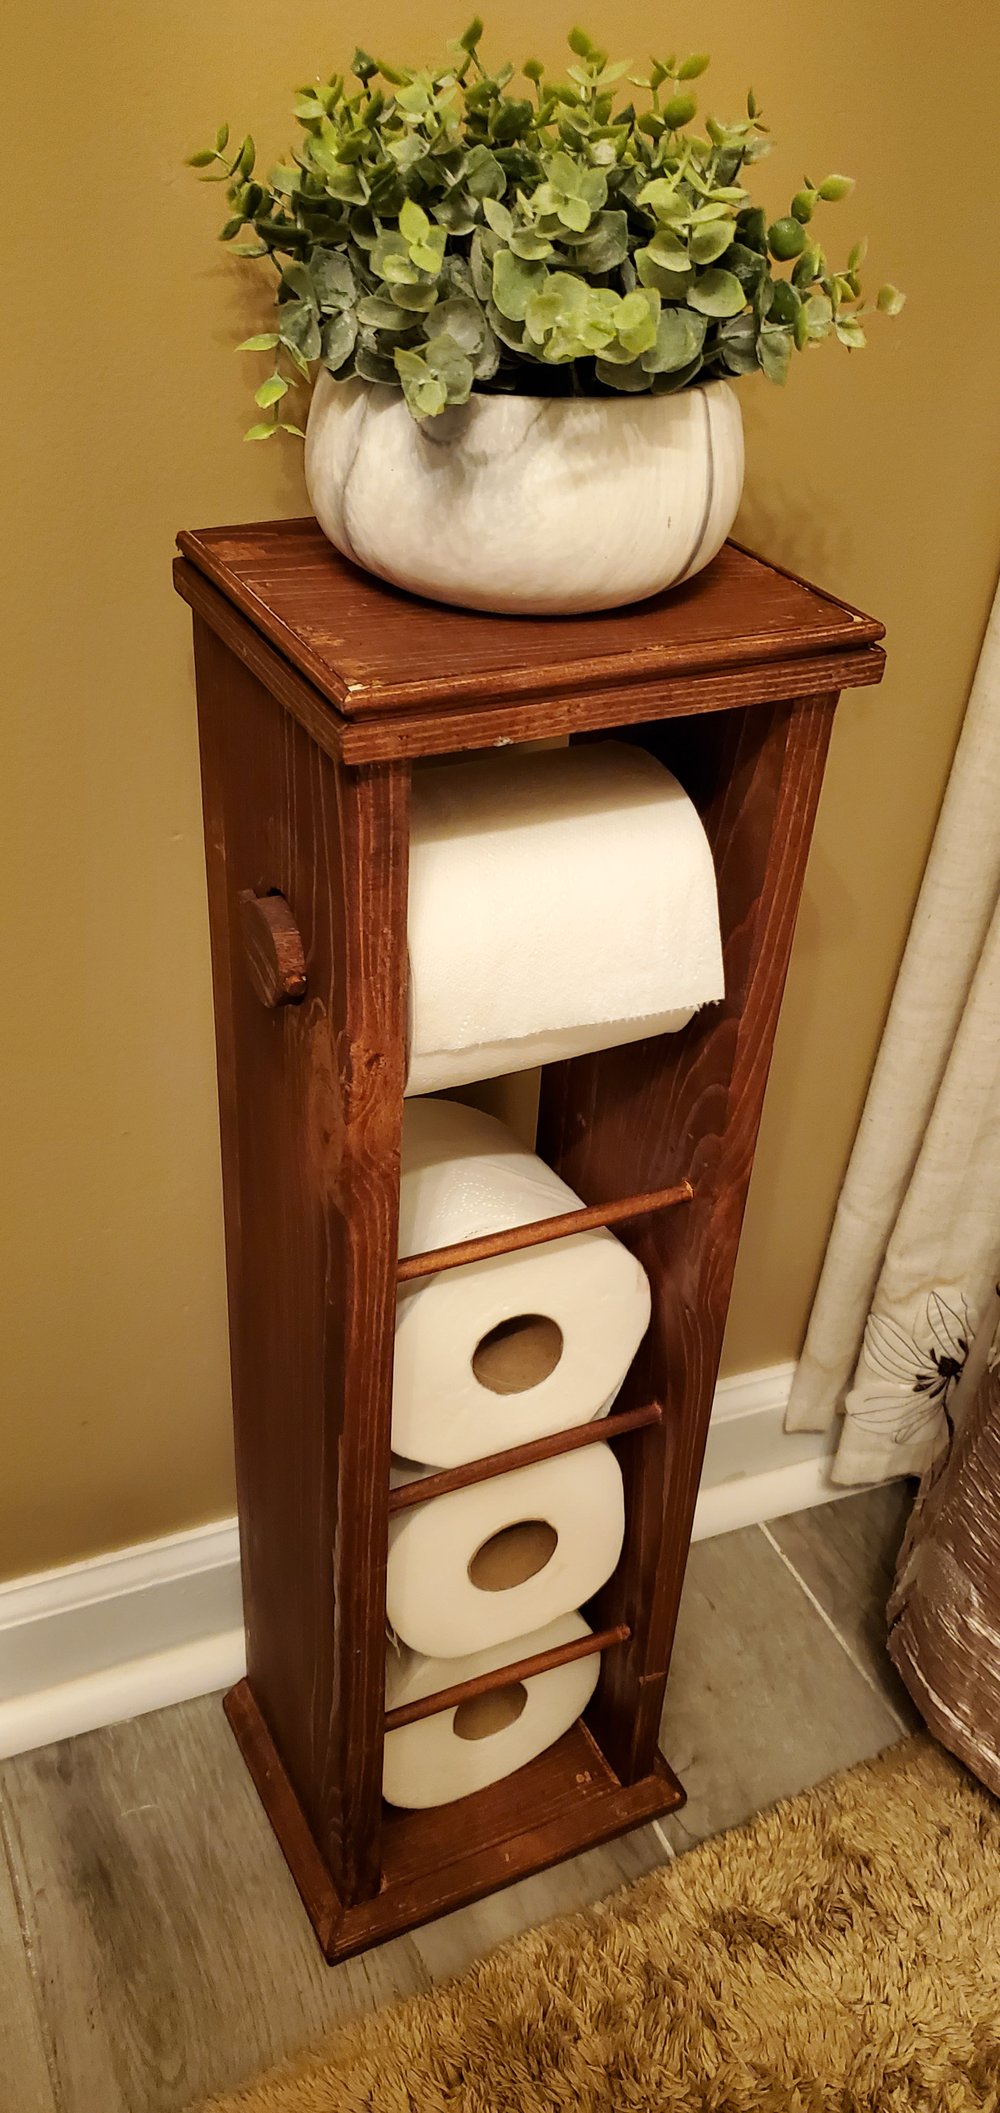 The Rustic Toilet Paper Tower Toilet Paper Holder, Toilet Paper Rack, Toilet  Paper Storage 